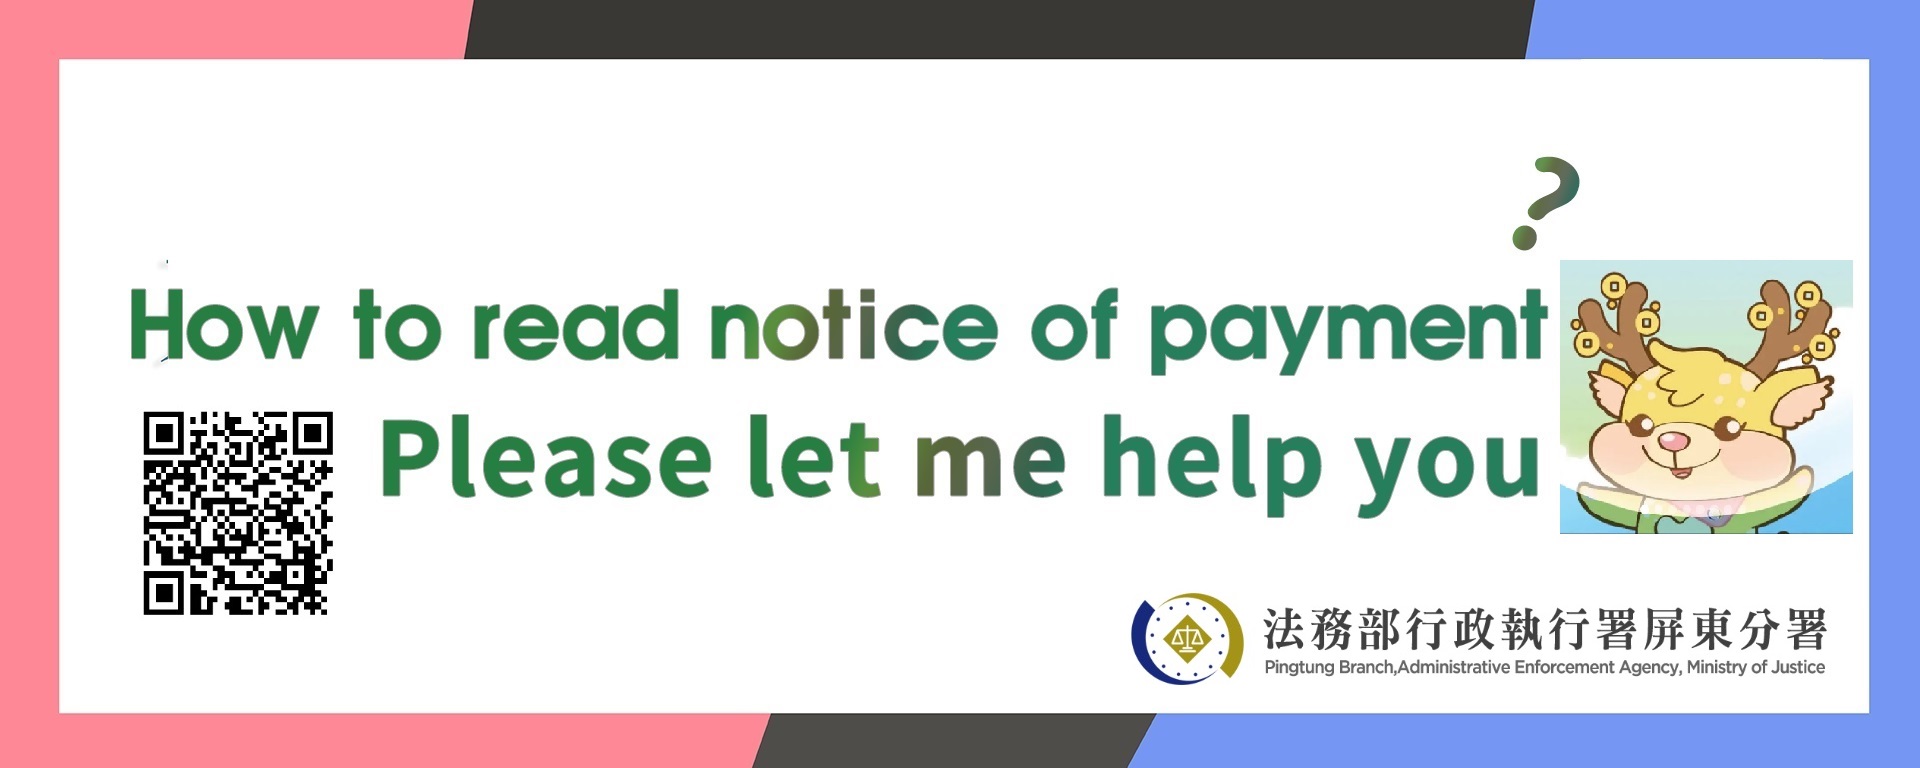 how-to-read-notice-of-payment-2023